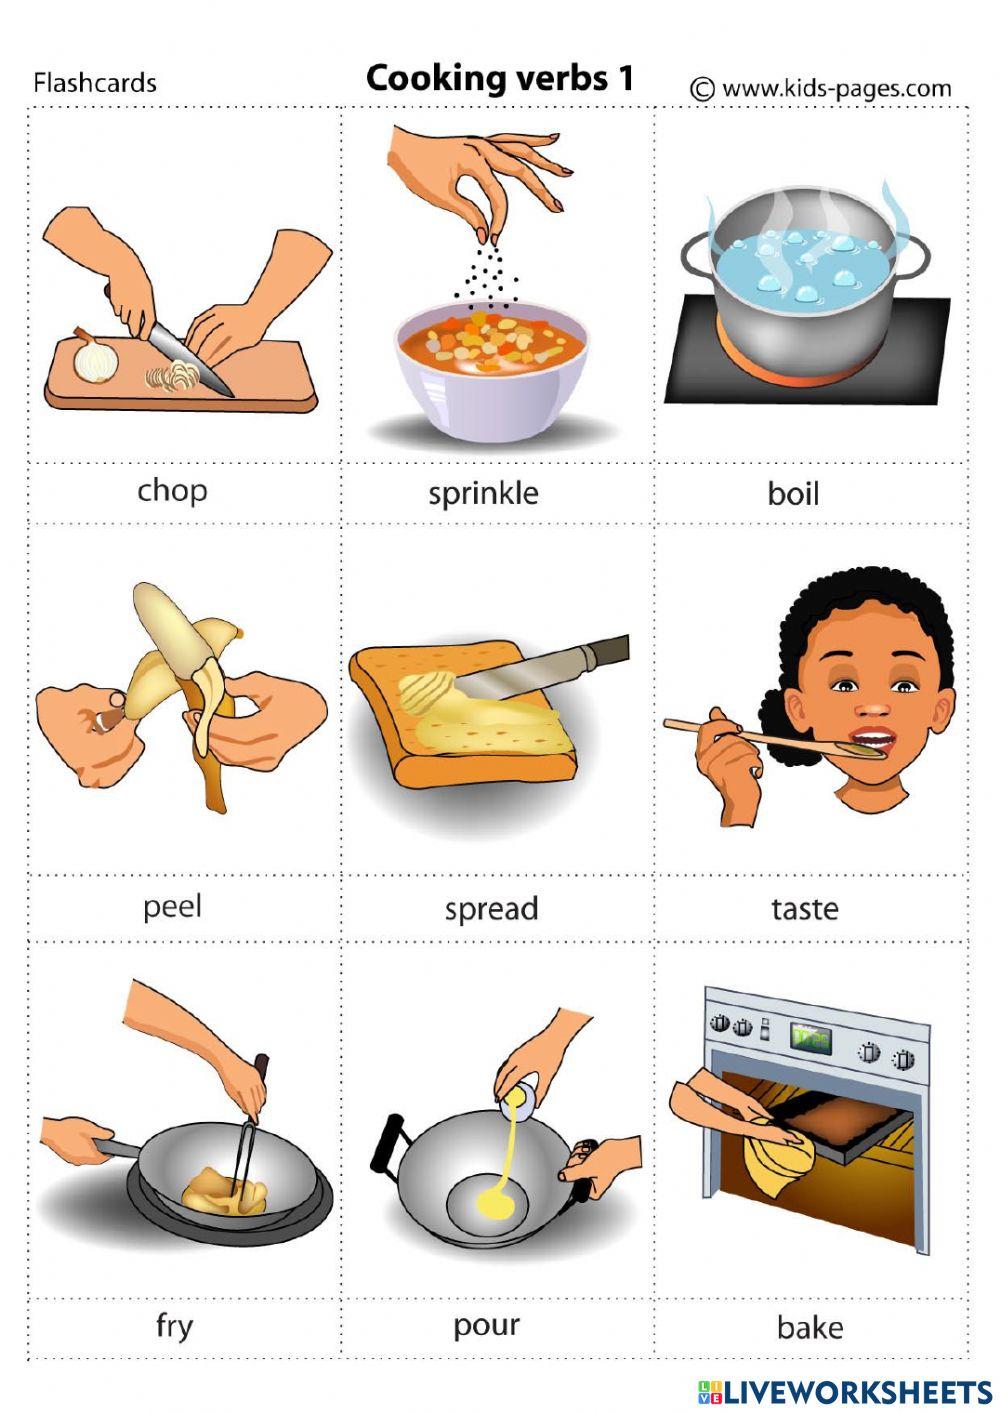 Pdf cook. Cooking verbs for Kids. Глаголы готовки на английском. Приготовление еды на английском языке. Глаголы приготовления пищи на английском.